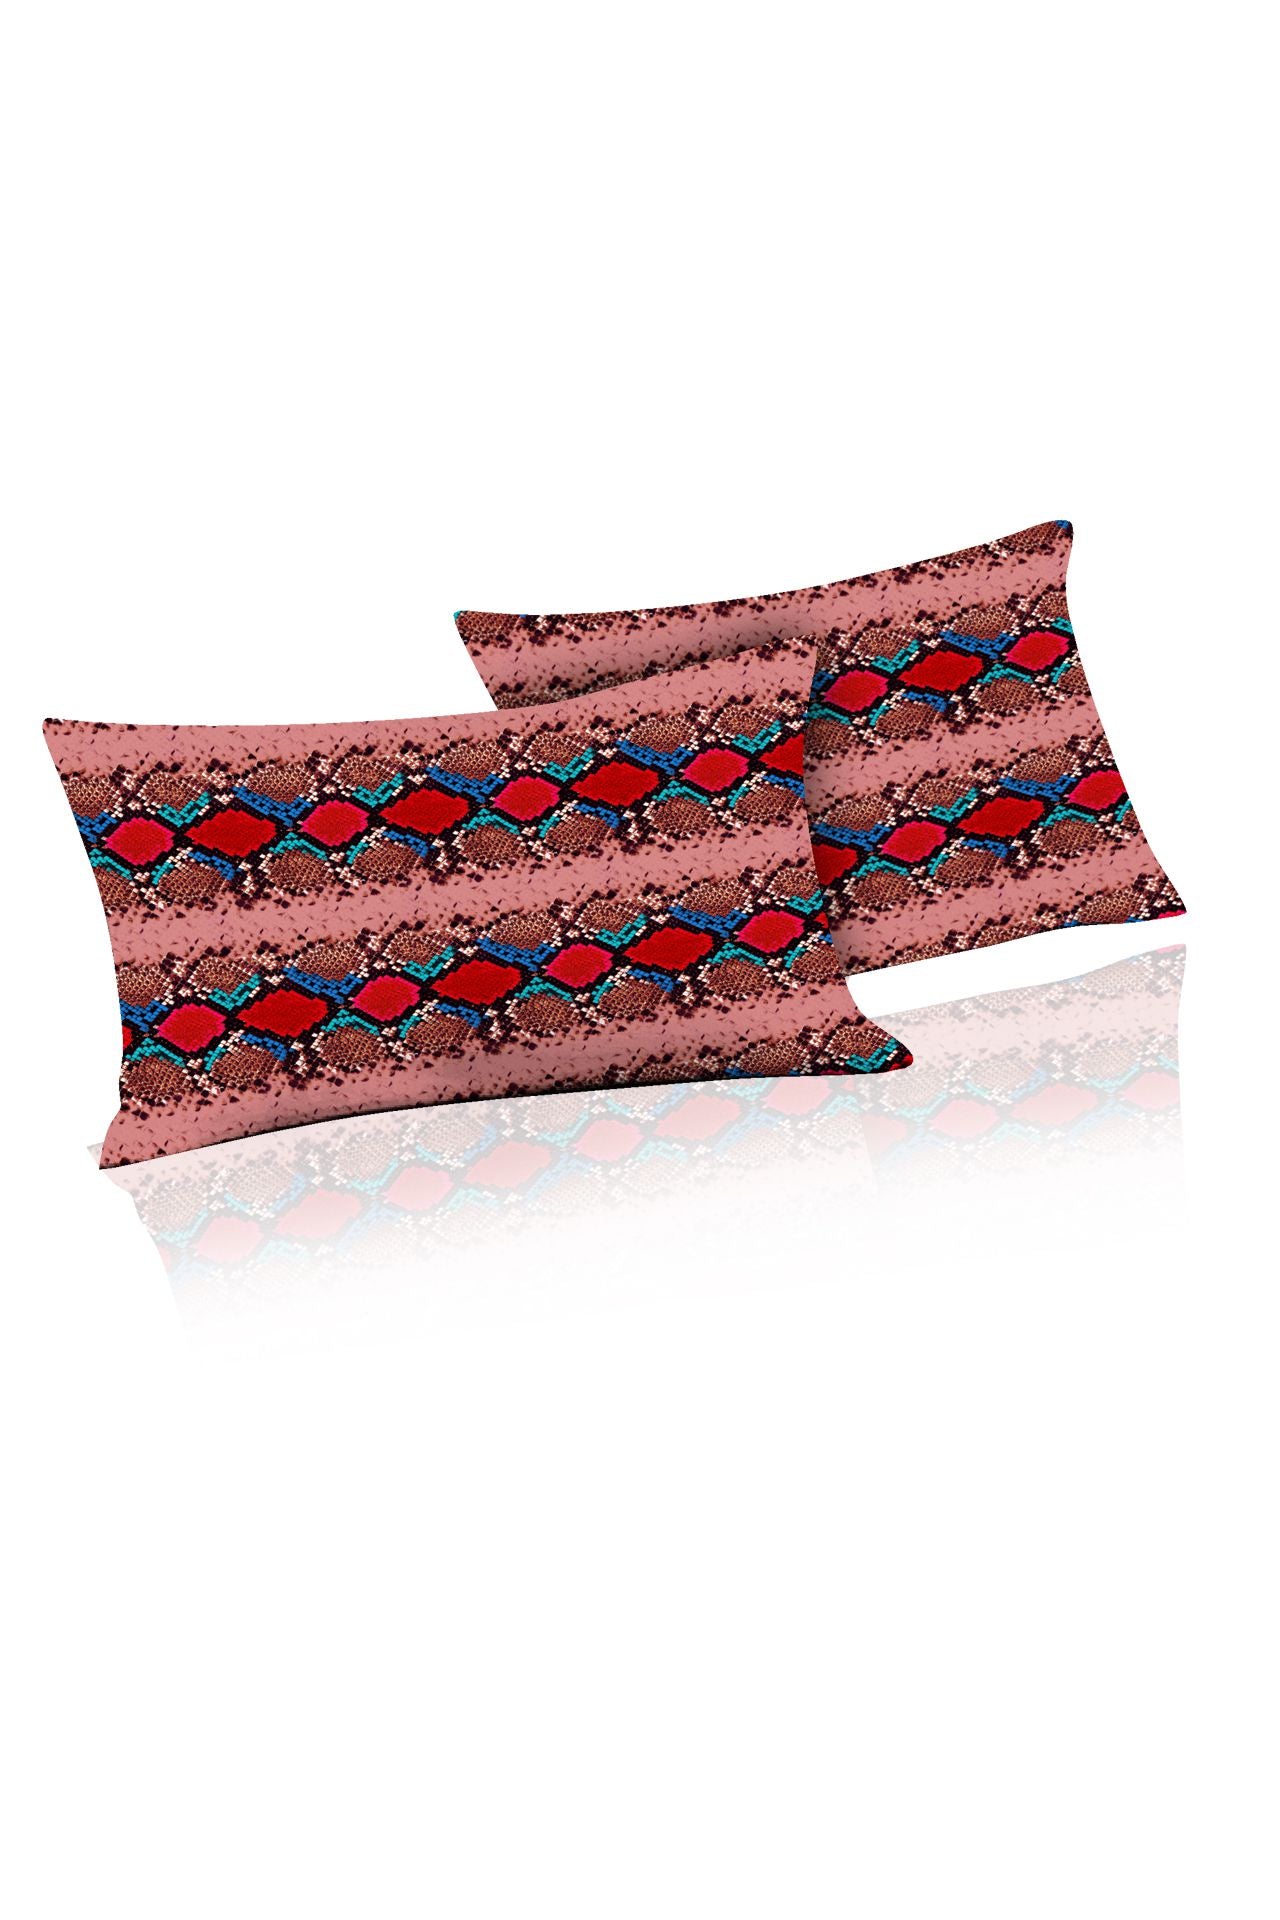 Red Pillow Cover with Biodegradable Fabrics